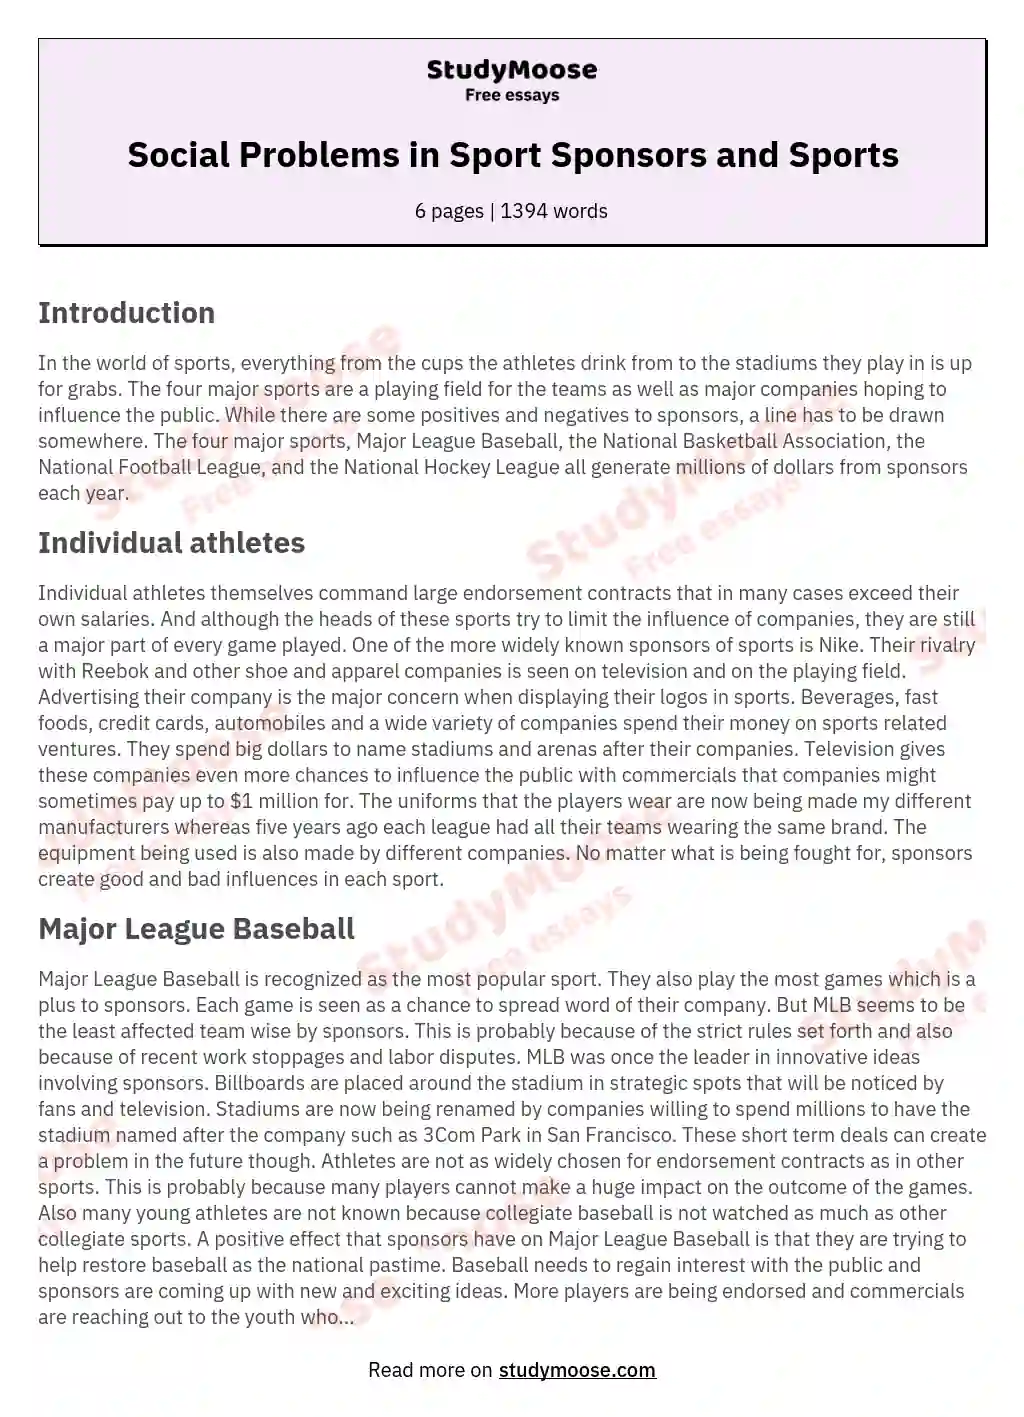 Social Problems in Sport Sponsors and Sports essay